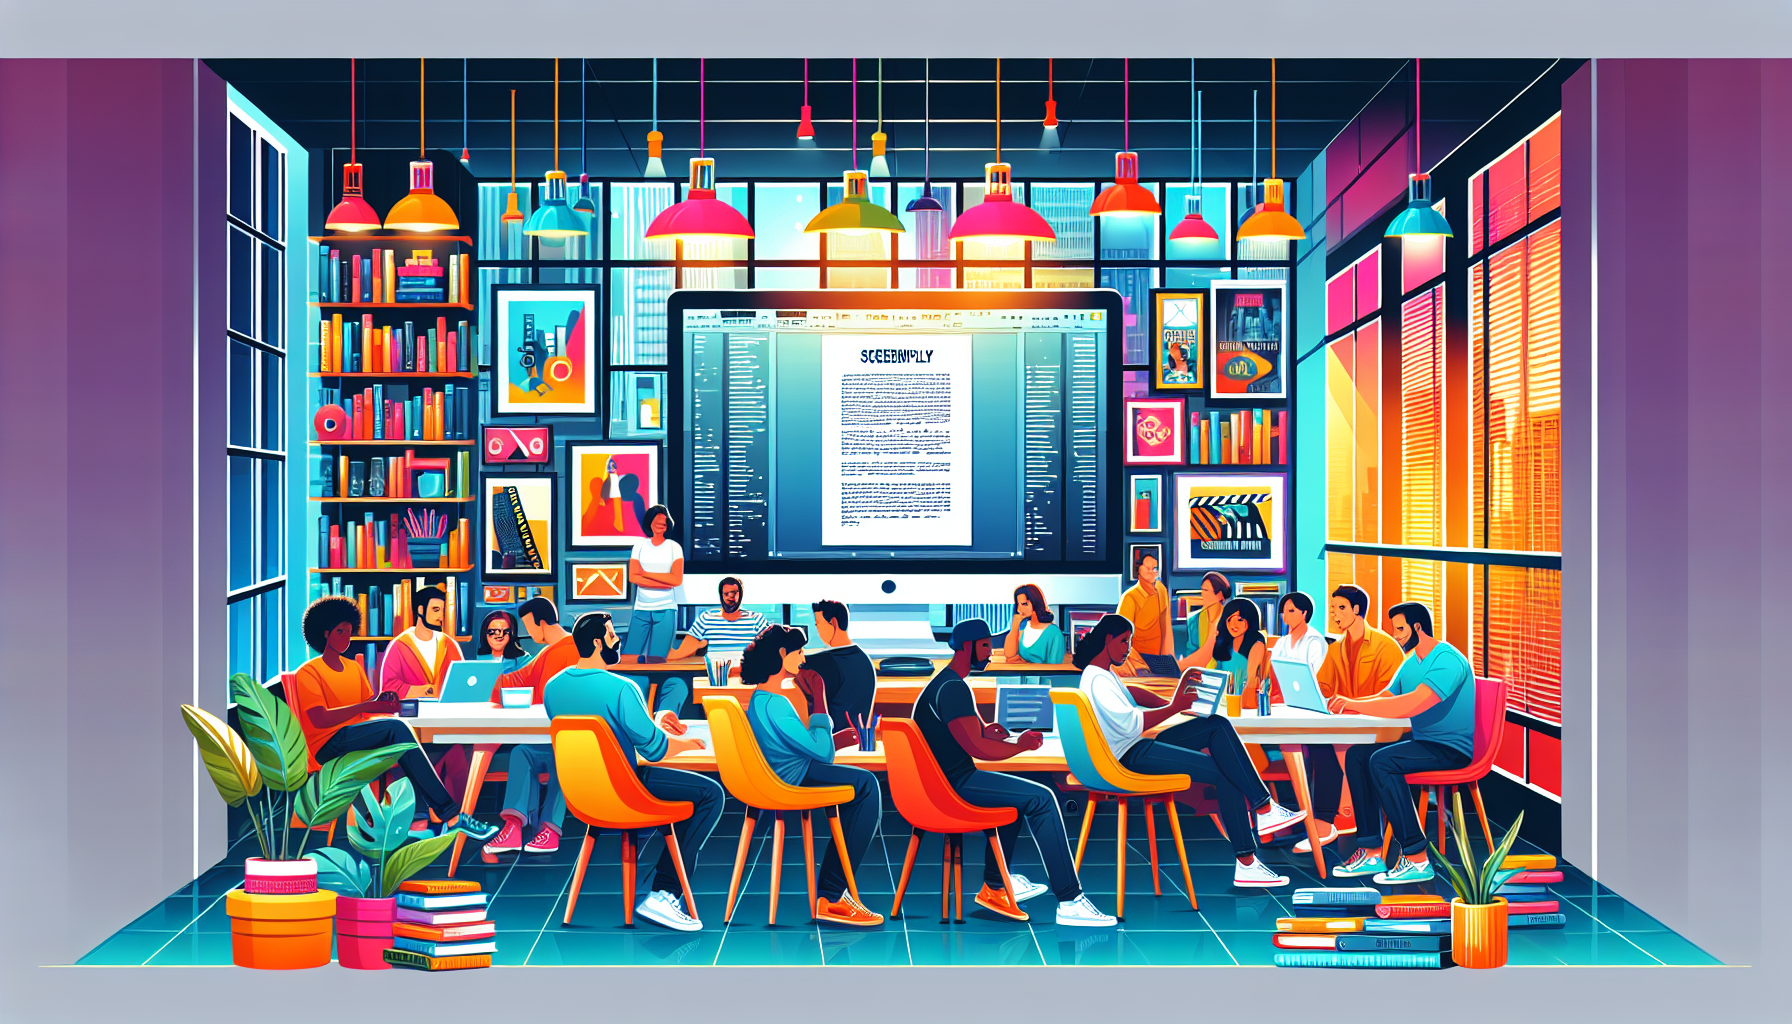 An artistic illustration of a diverse group of people gathered around a large, glowing computer screen displaying a screenplay, set in a cozy, modern office environment filled with film posters and sc